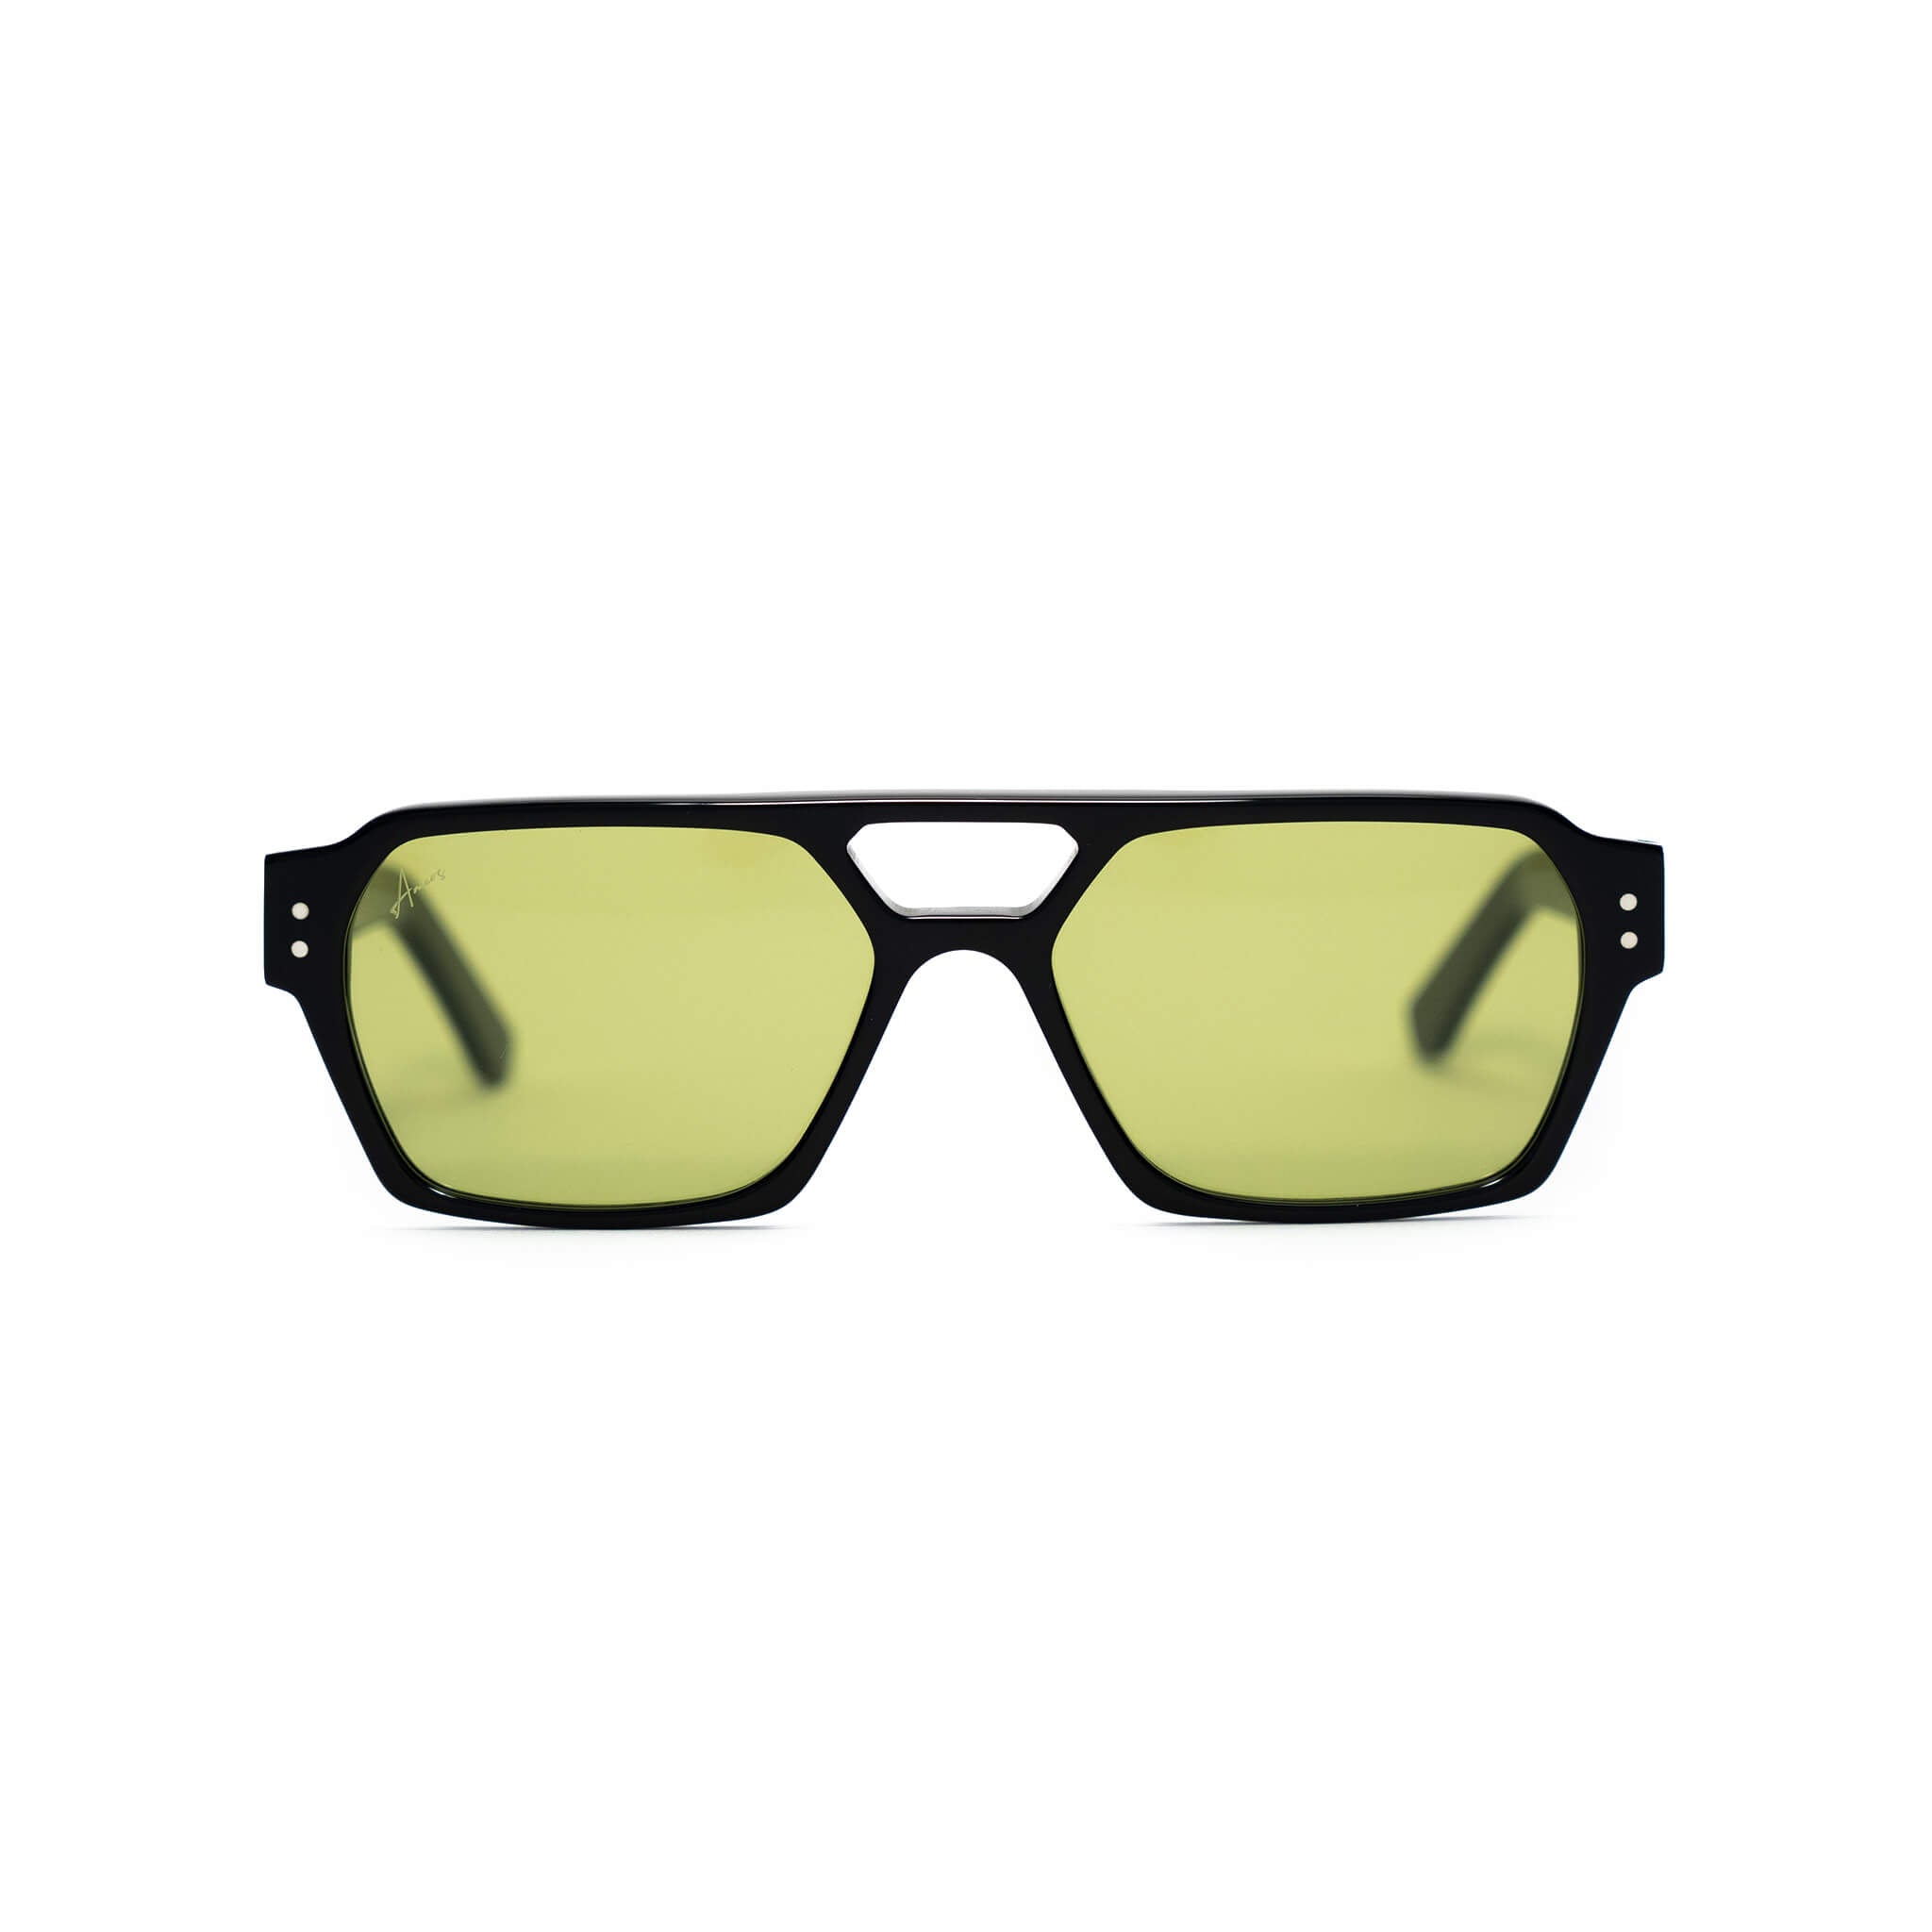 Ego sunglasses in black and green from Ameos